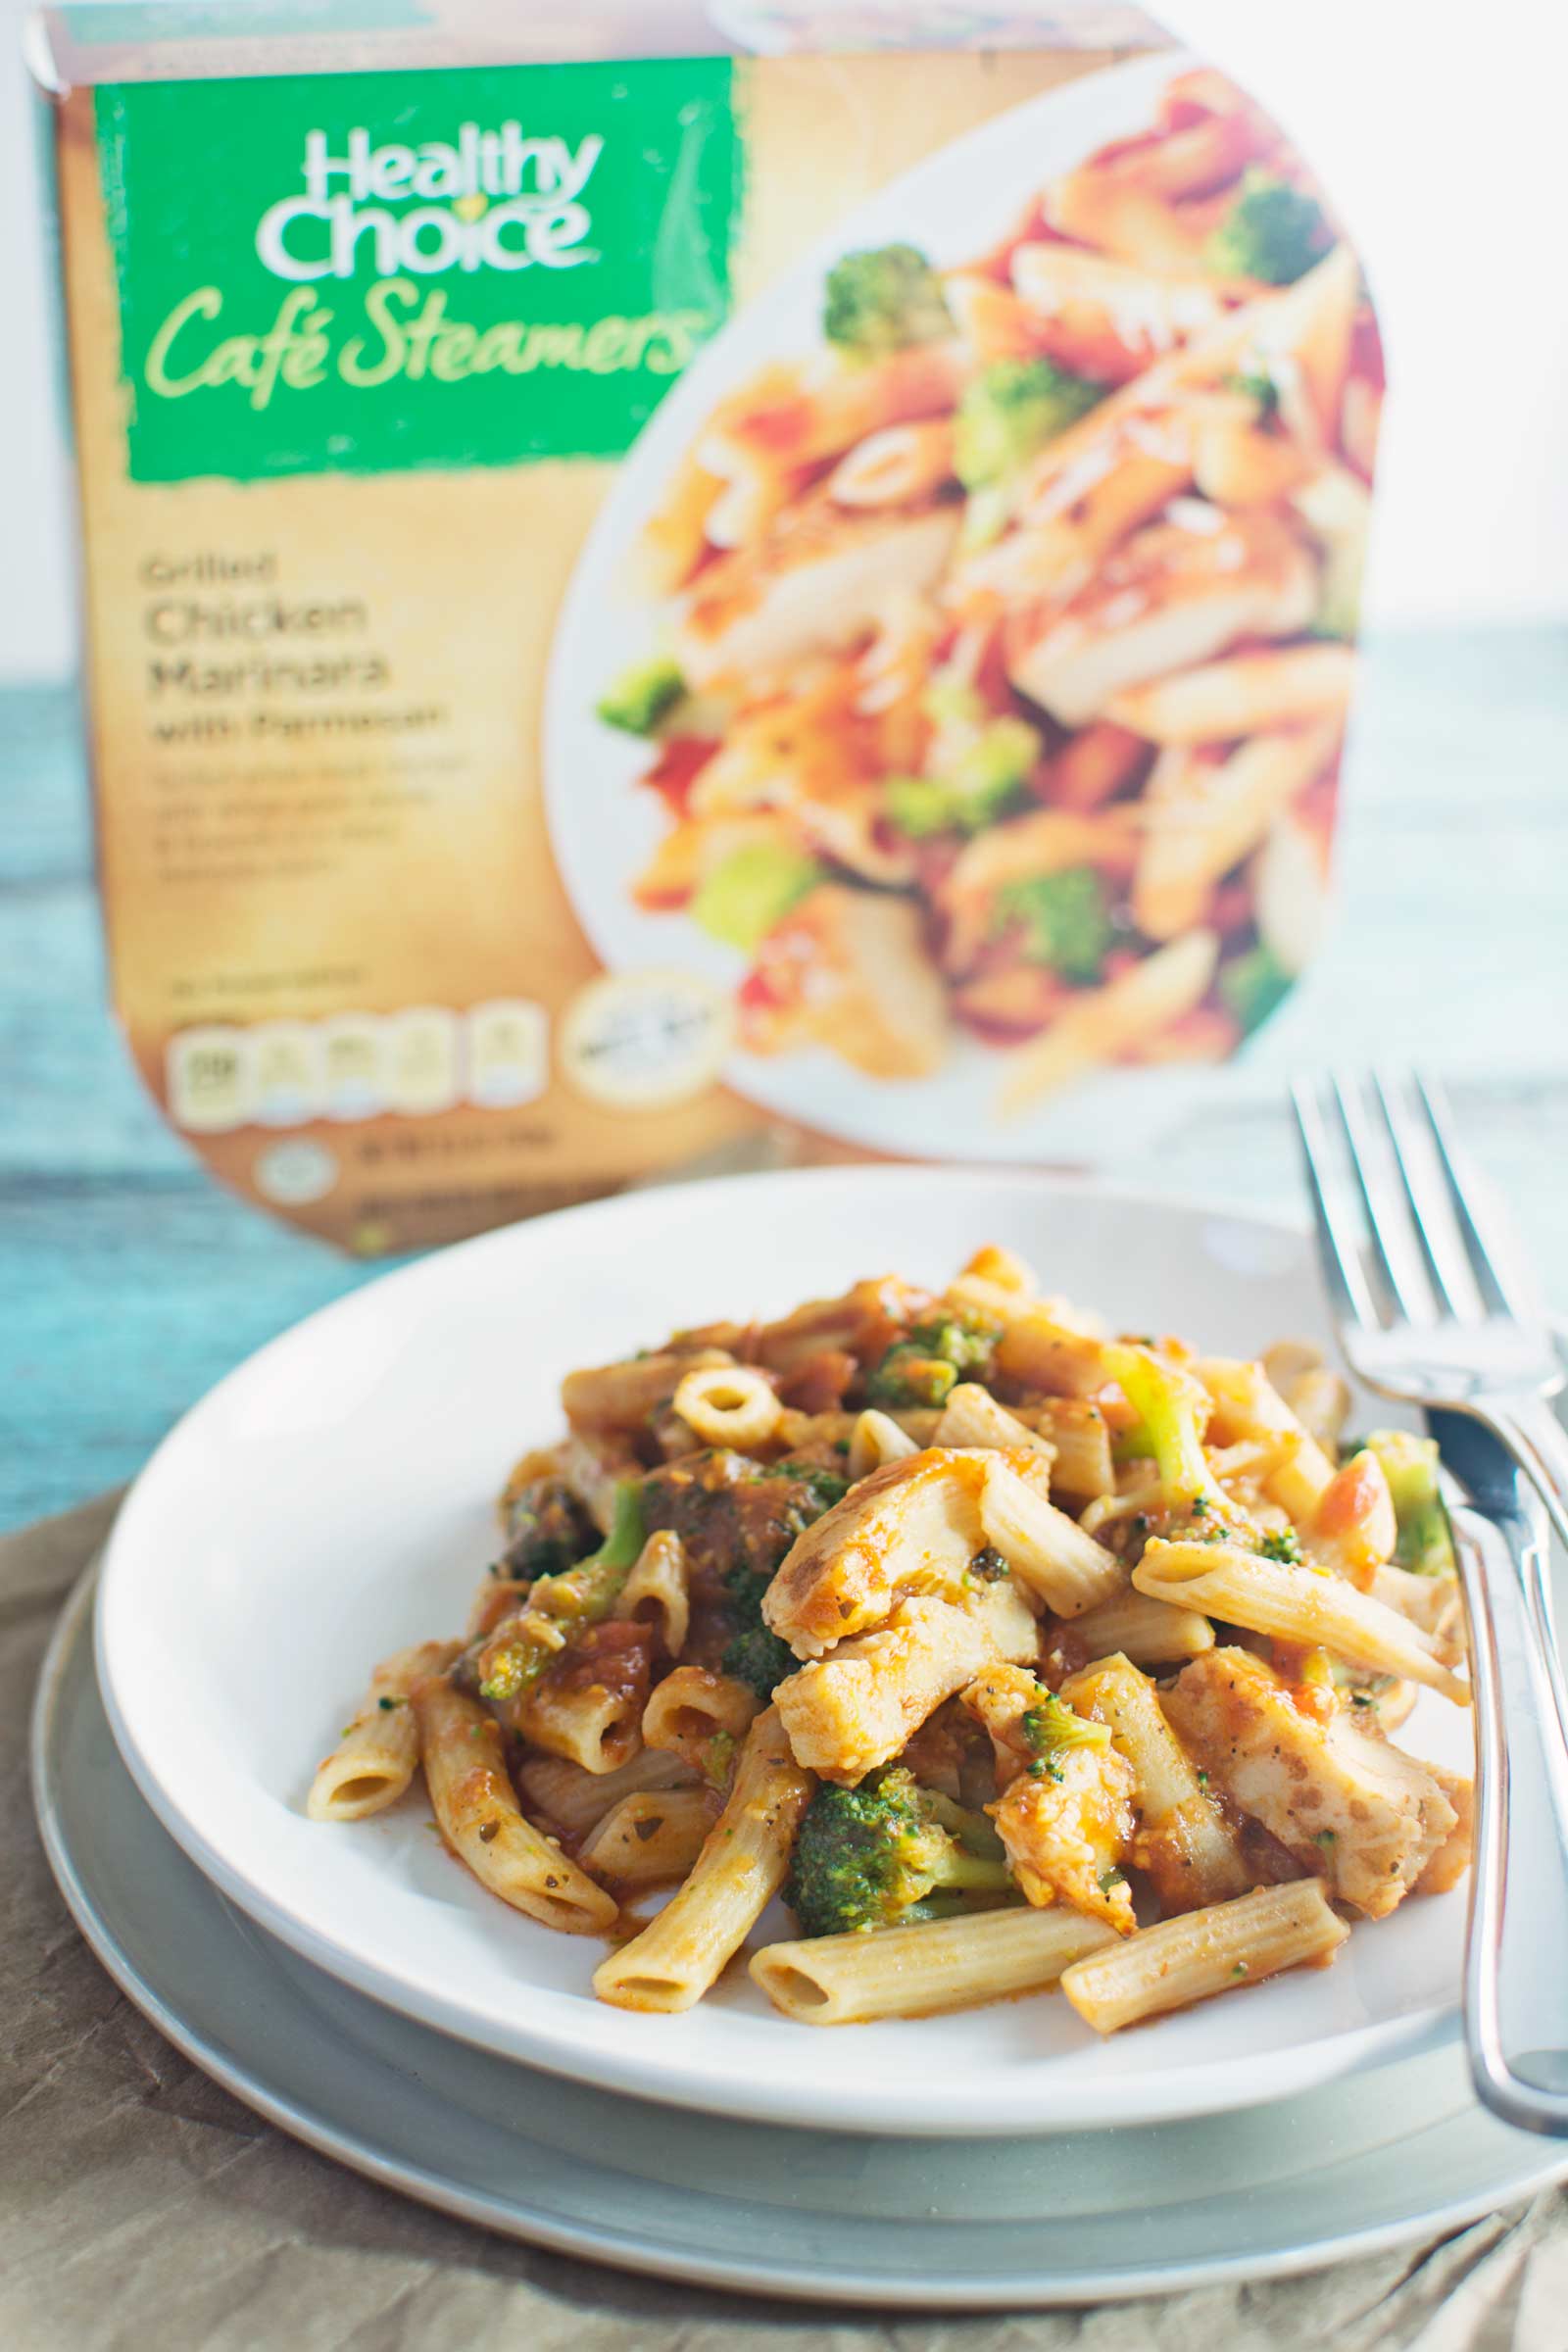 Easy go-to lunches from Healthy Choice Cafe Steamers - #LiveHealthyChoice #ad